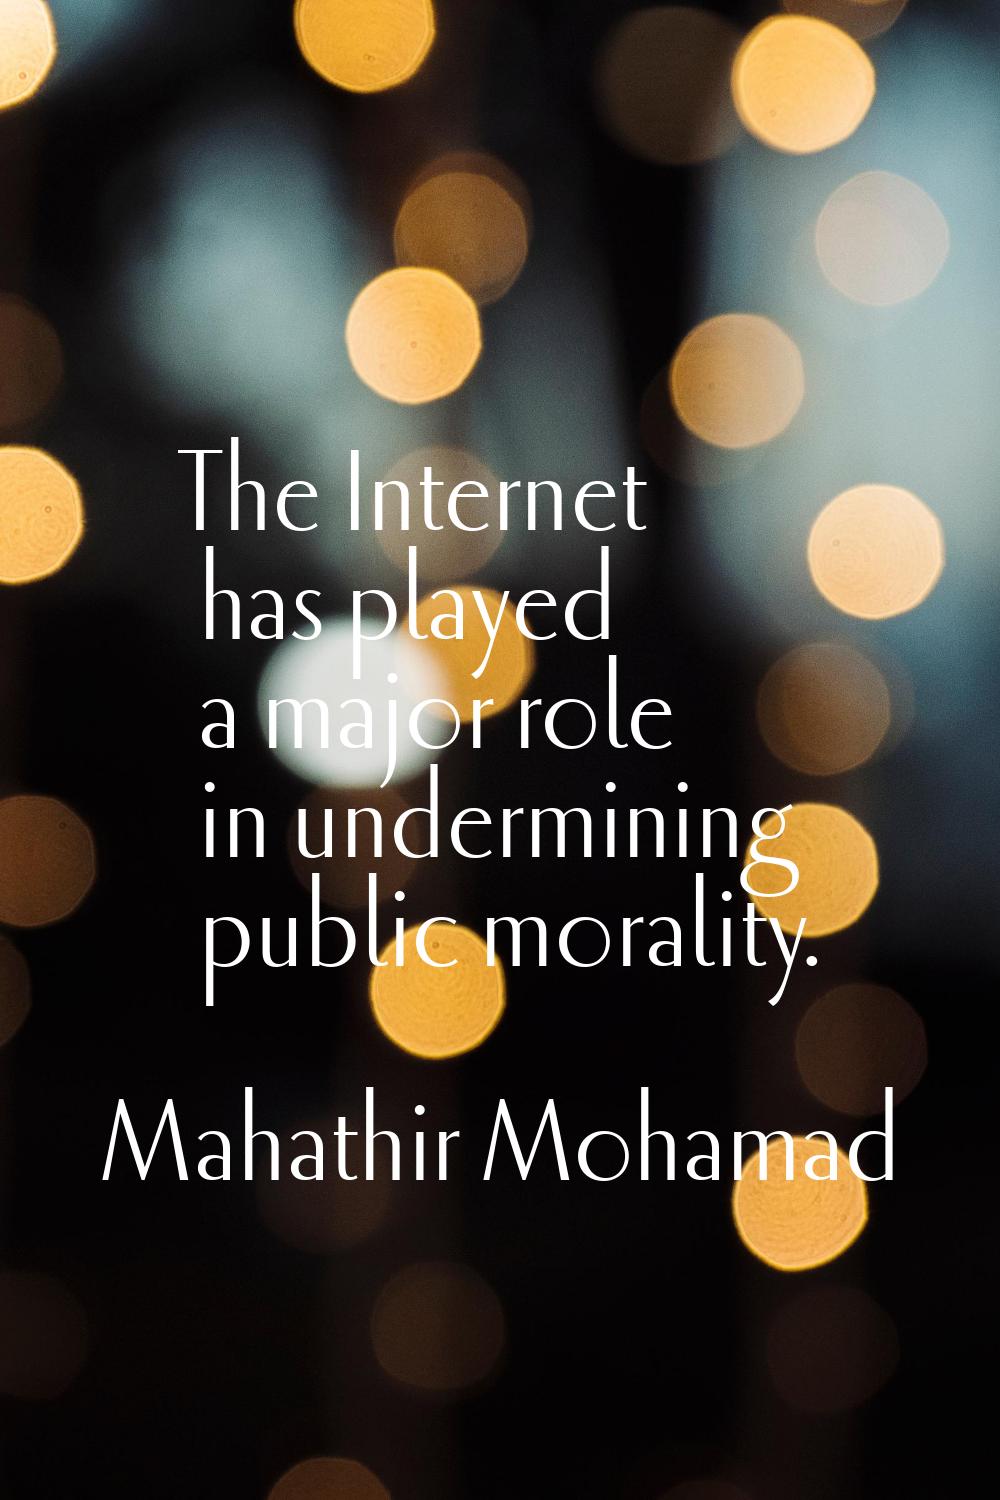 The Internet has played a major role in undermining public morality.